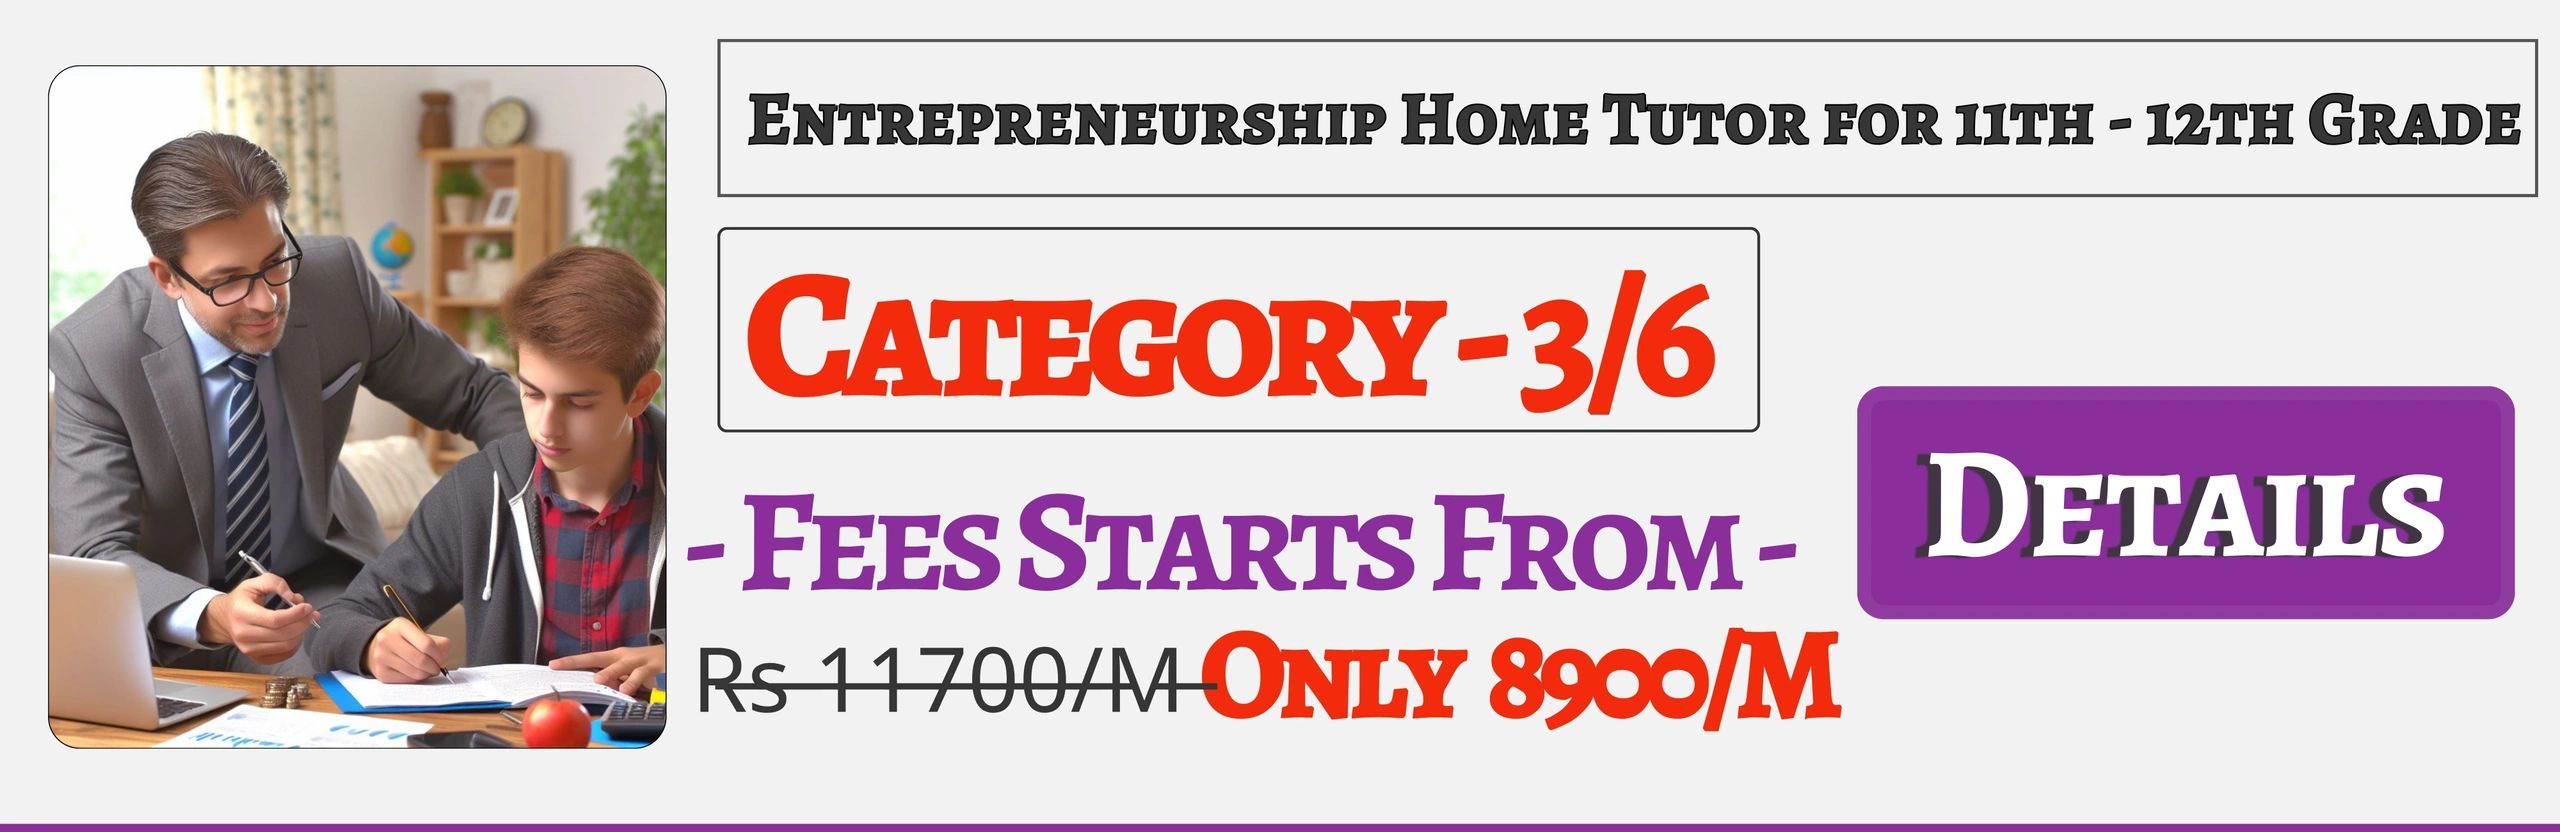 Book Best Nearby Entrepreneurship Home Tuition Tutors For 11th & 12th In Jaipur , Fees Only 8900/M